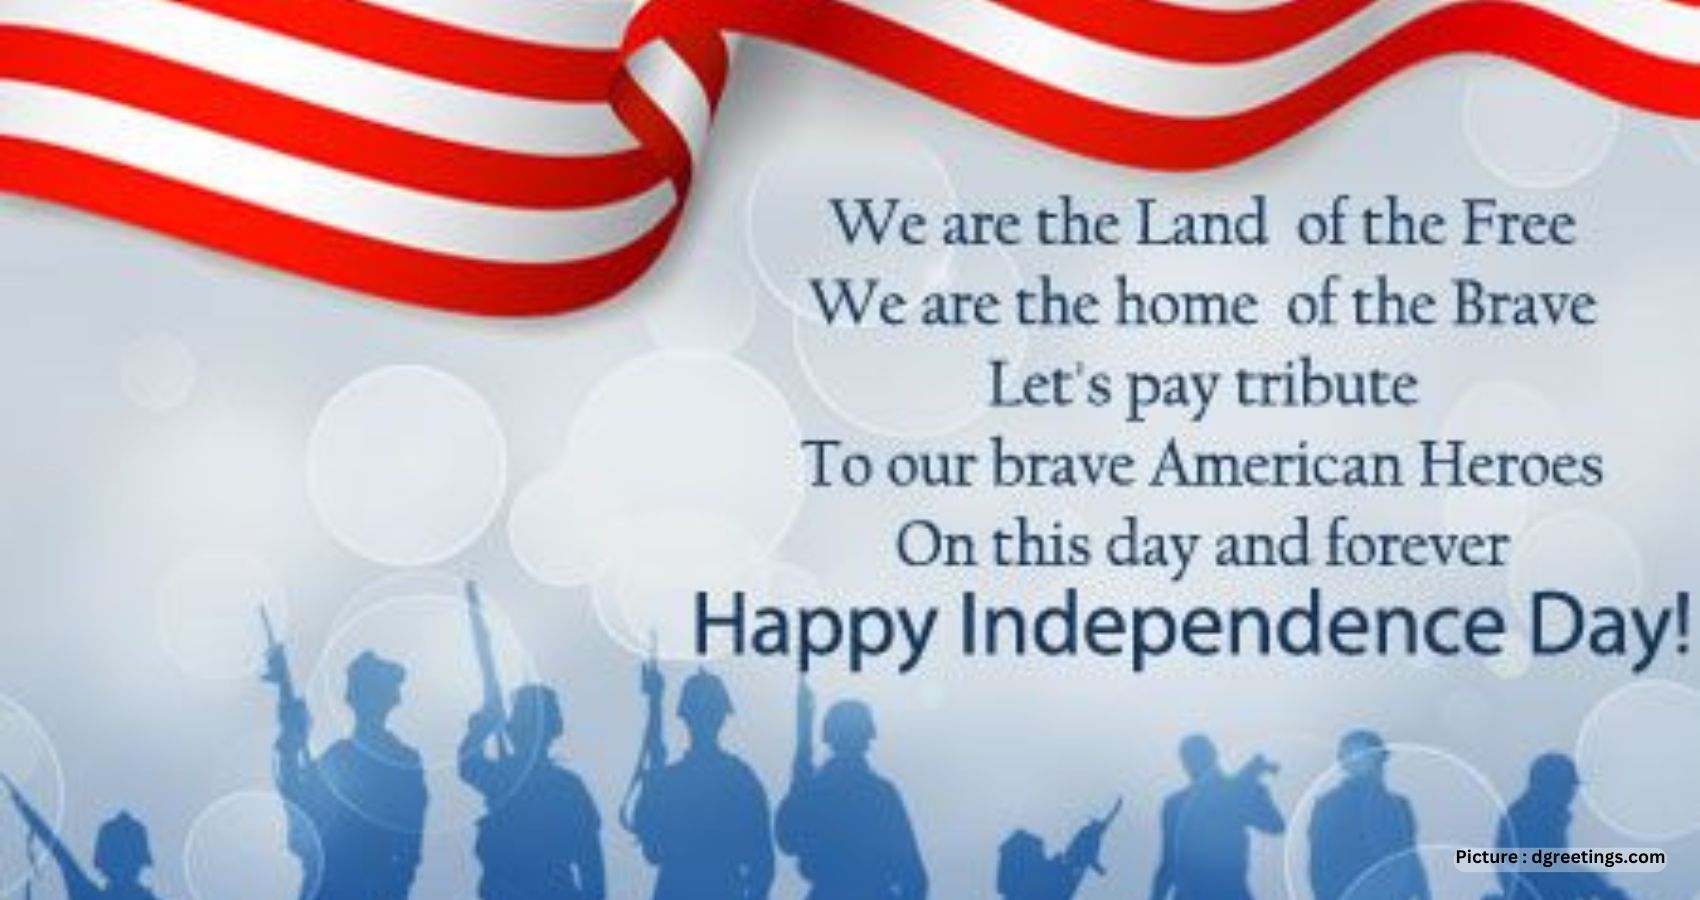 Happy Independence Day America!